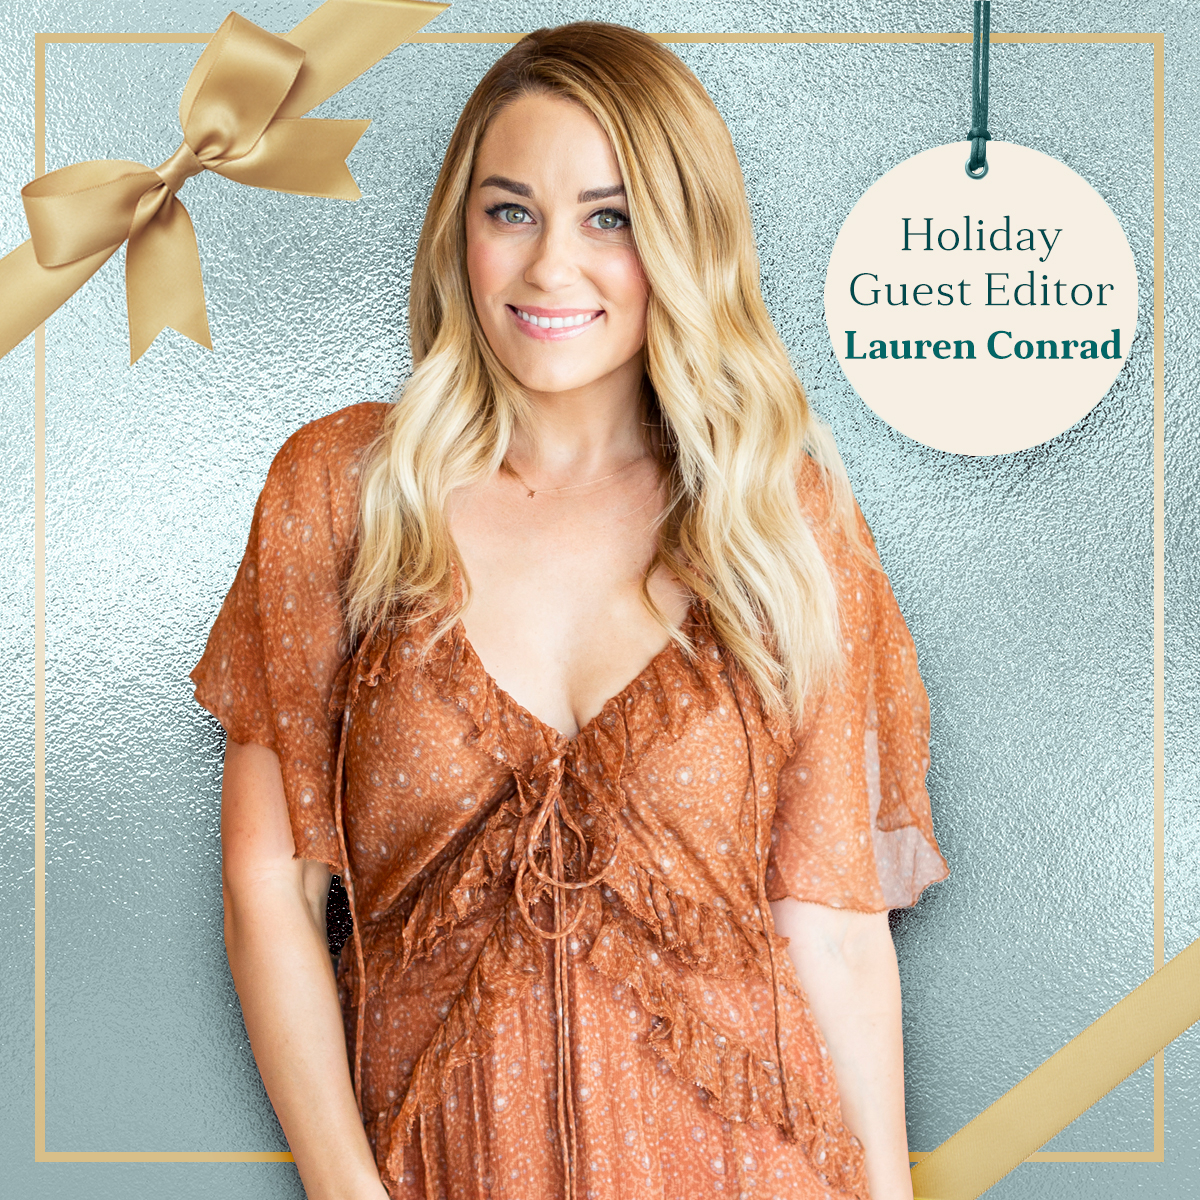 Lauren Conrad's Go-To Holiday Dress Is Pretty Much Perfect